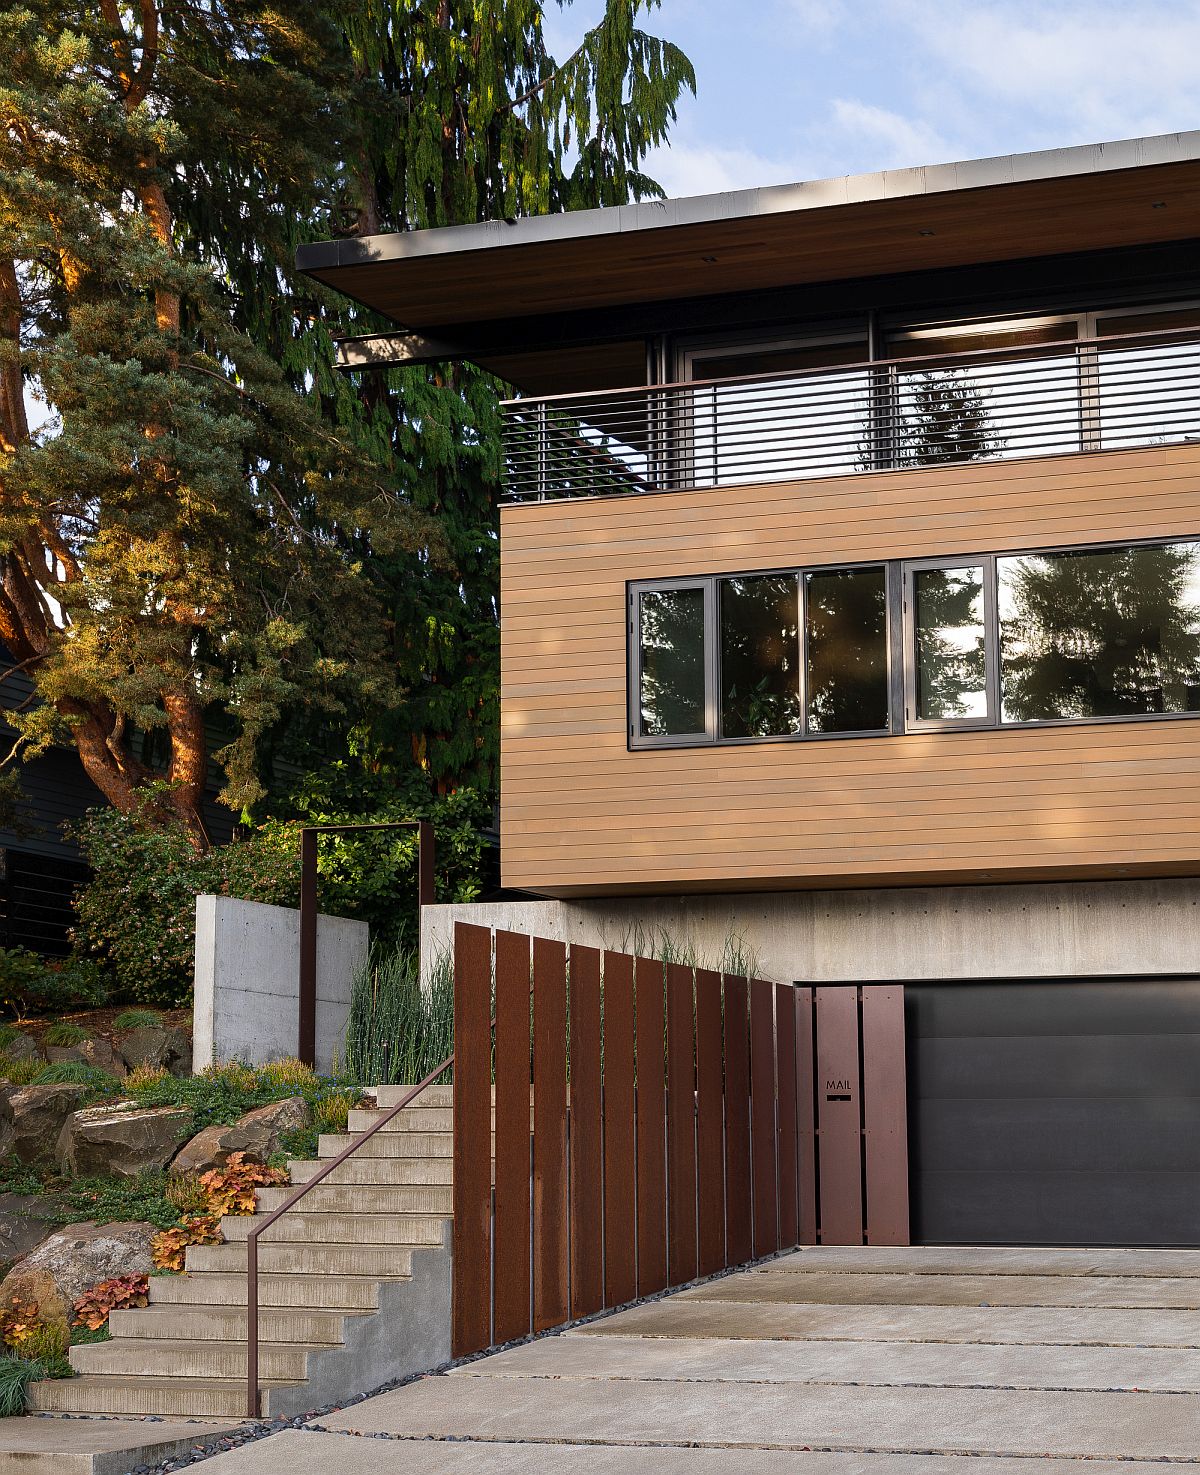 Building for Tomorrow: Mountain and Lake Views Shape Modern Seattle Home